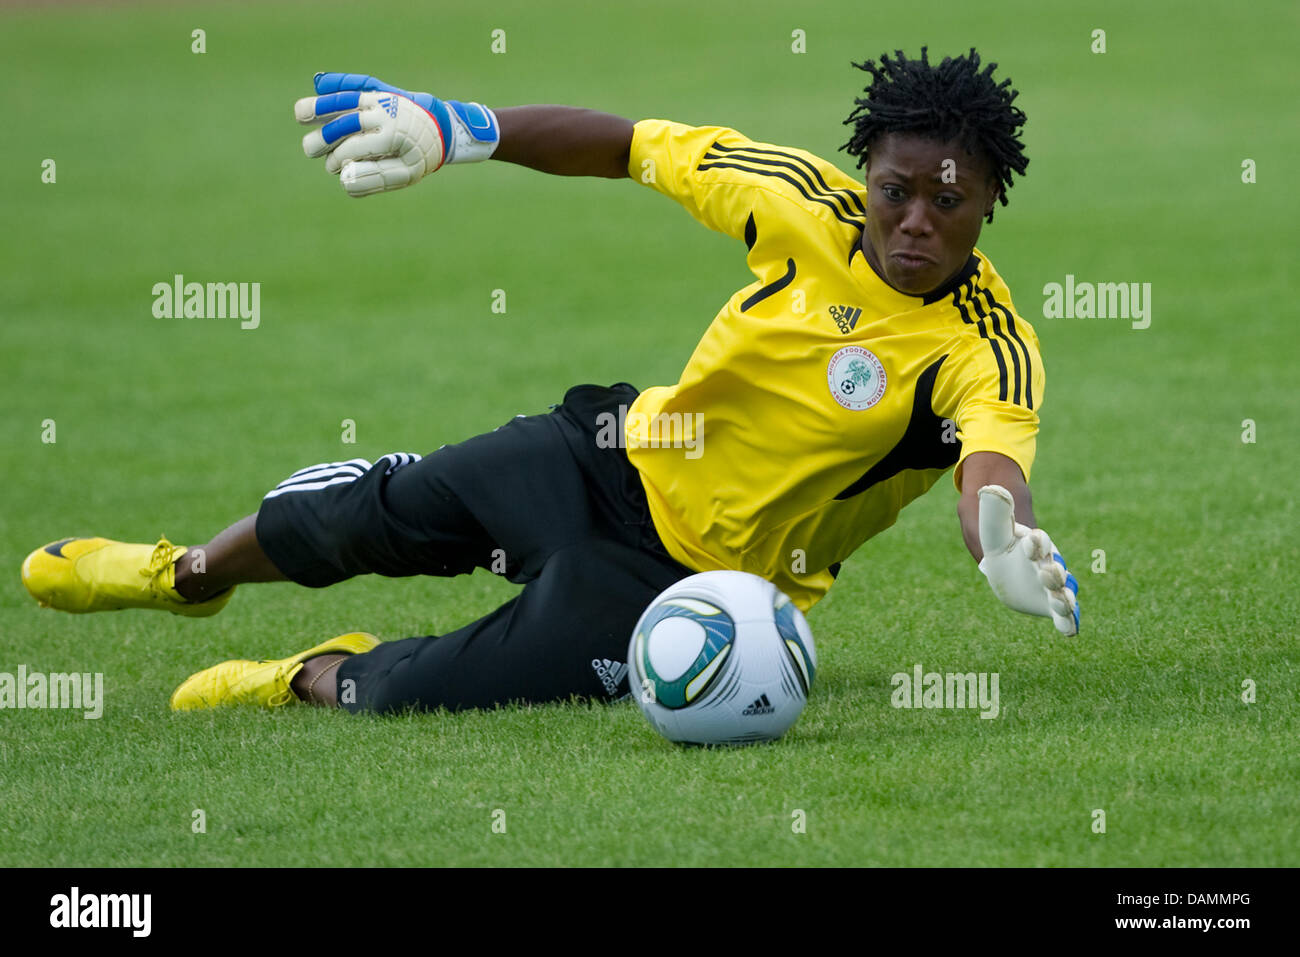 The Nigerian national goalkeeper Precious Dede saves the ball during a practice session in Heidelberg, Germany, 23 June 2011. On 26 June 2011, Nigeria will play its first World Cup group match against France. Photo: Uwe Anspach Stock Photo